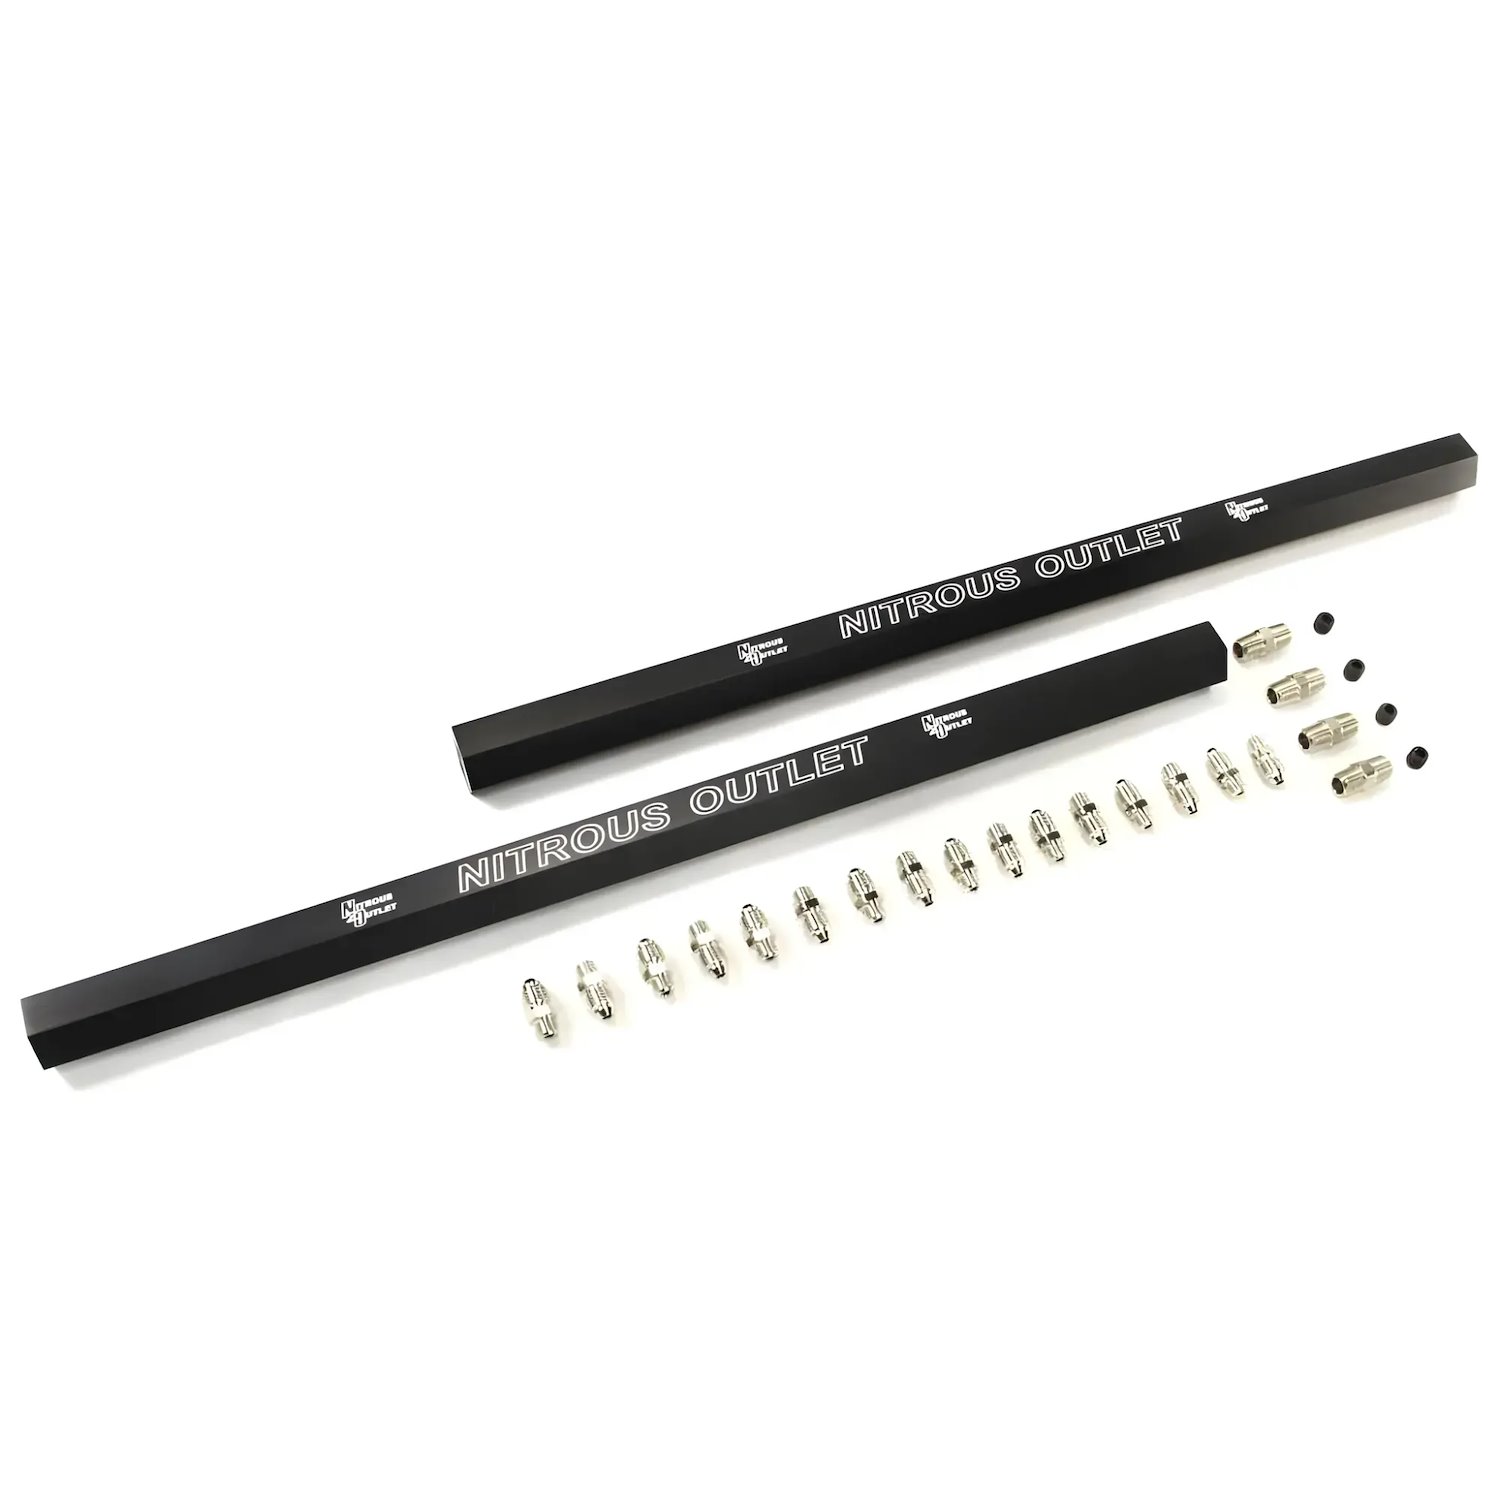 00-01765-D Dual Passage Dual Injection Rails w/Fittings, DYI, Anodized Black, Laser Marked, 18 in. Long